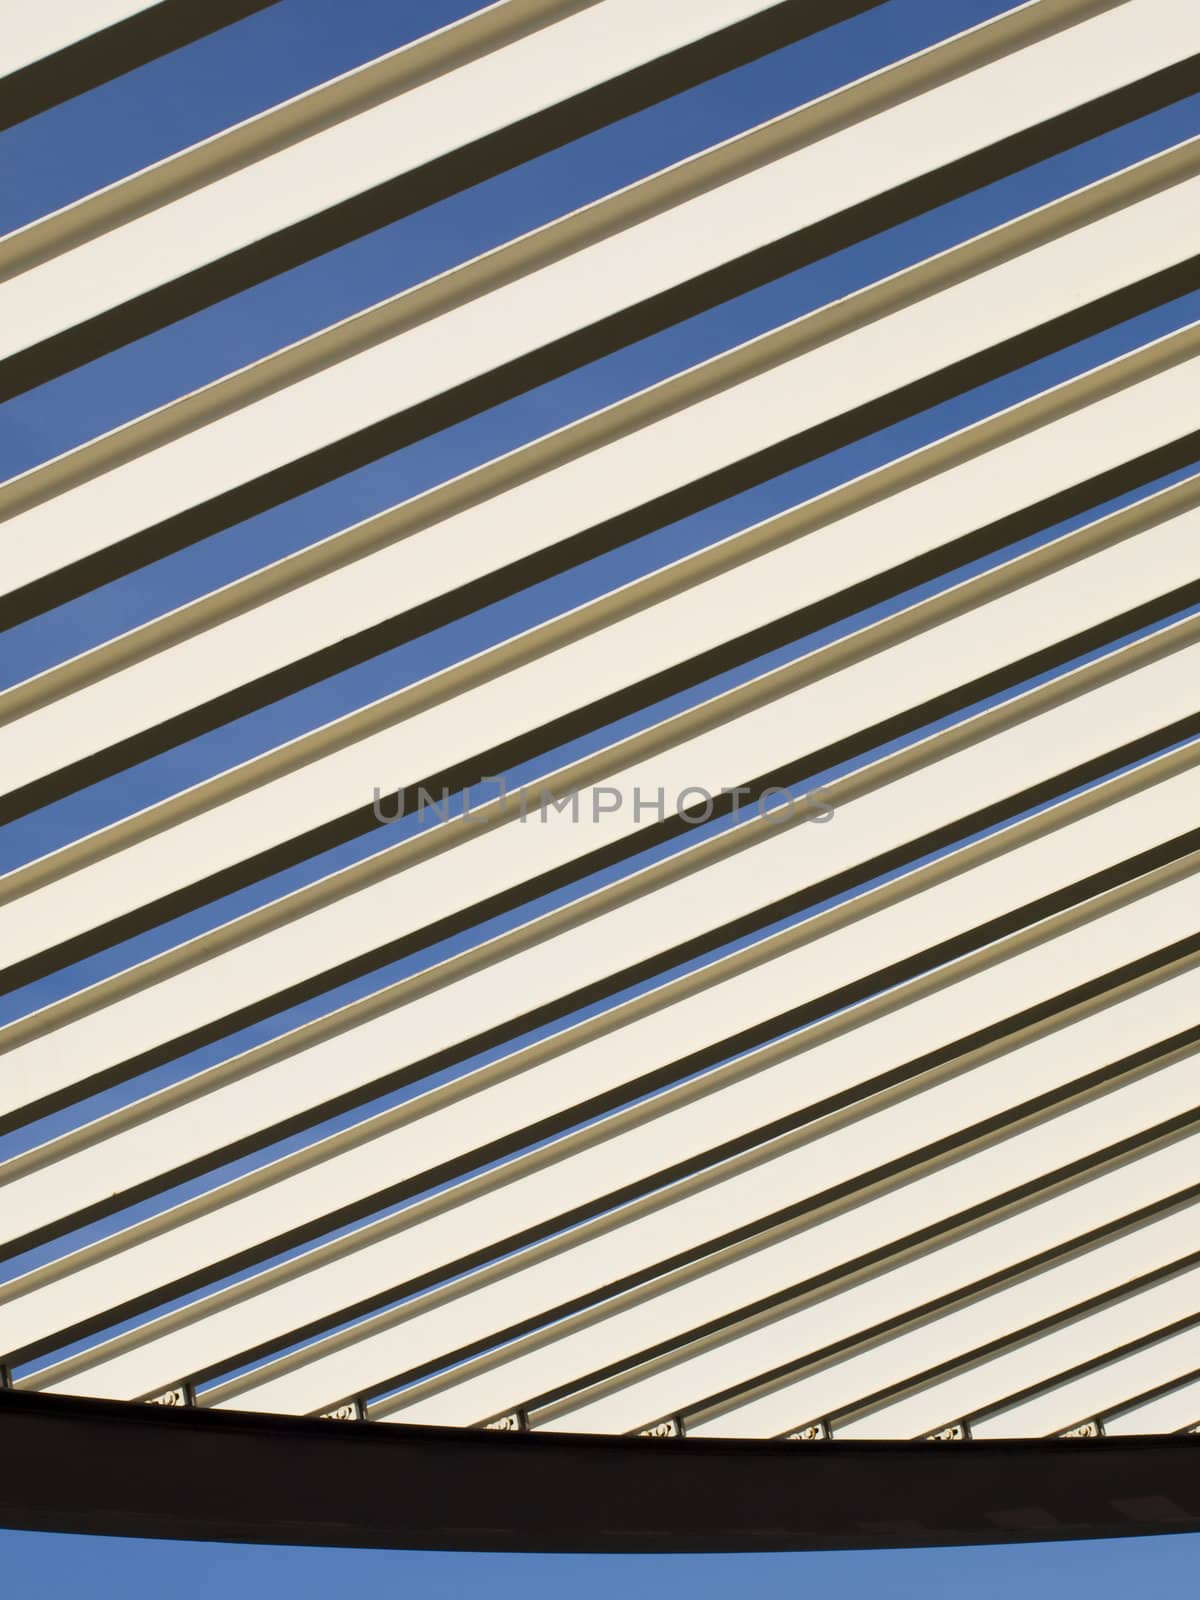 Line abstract from a ceiling of a covering structure.